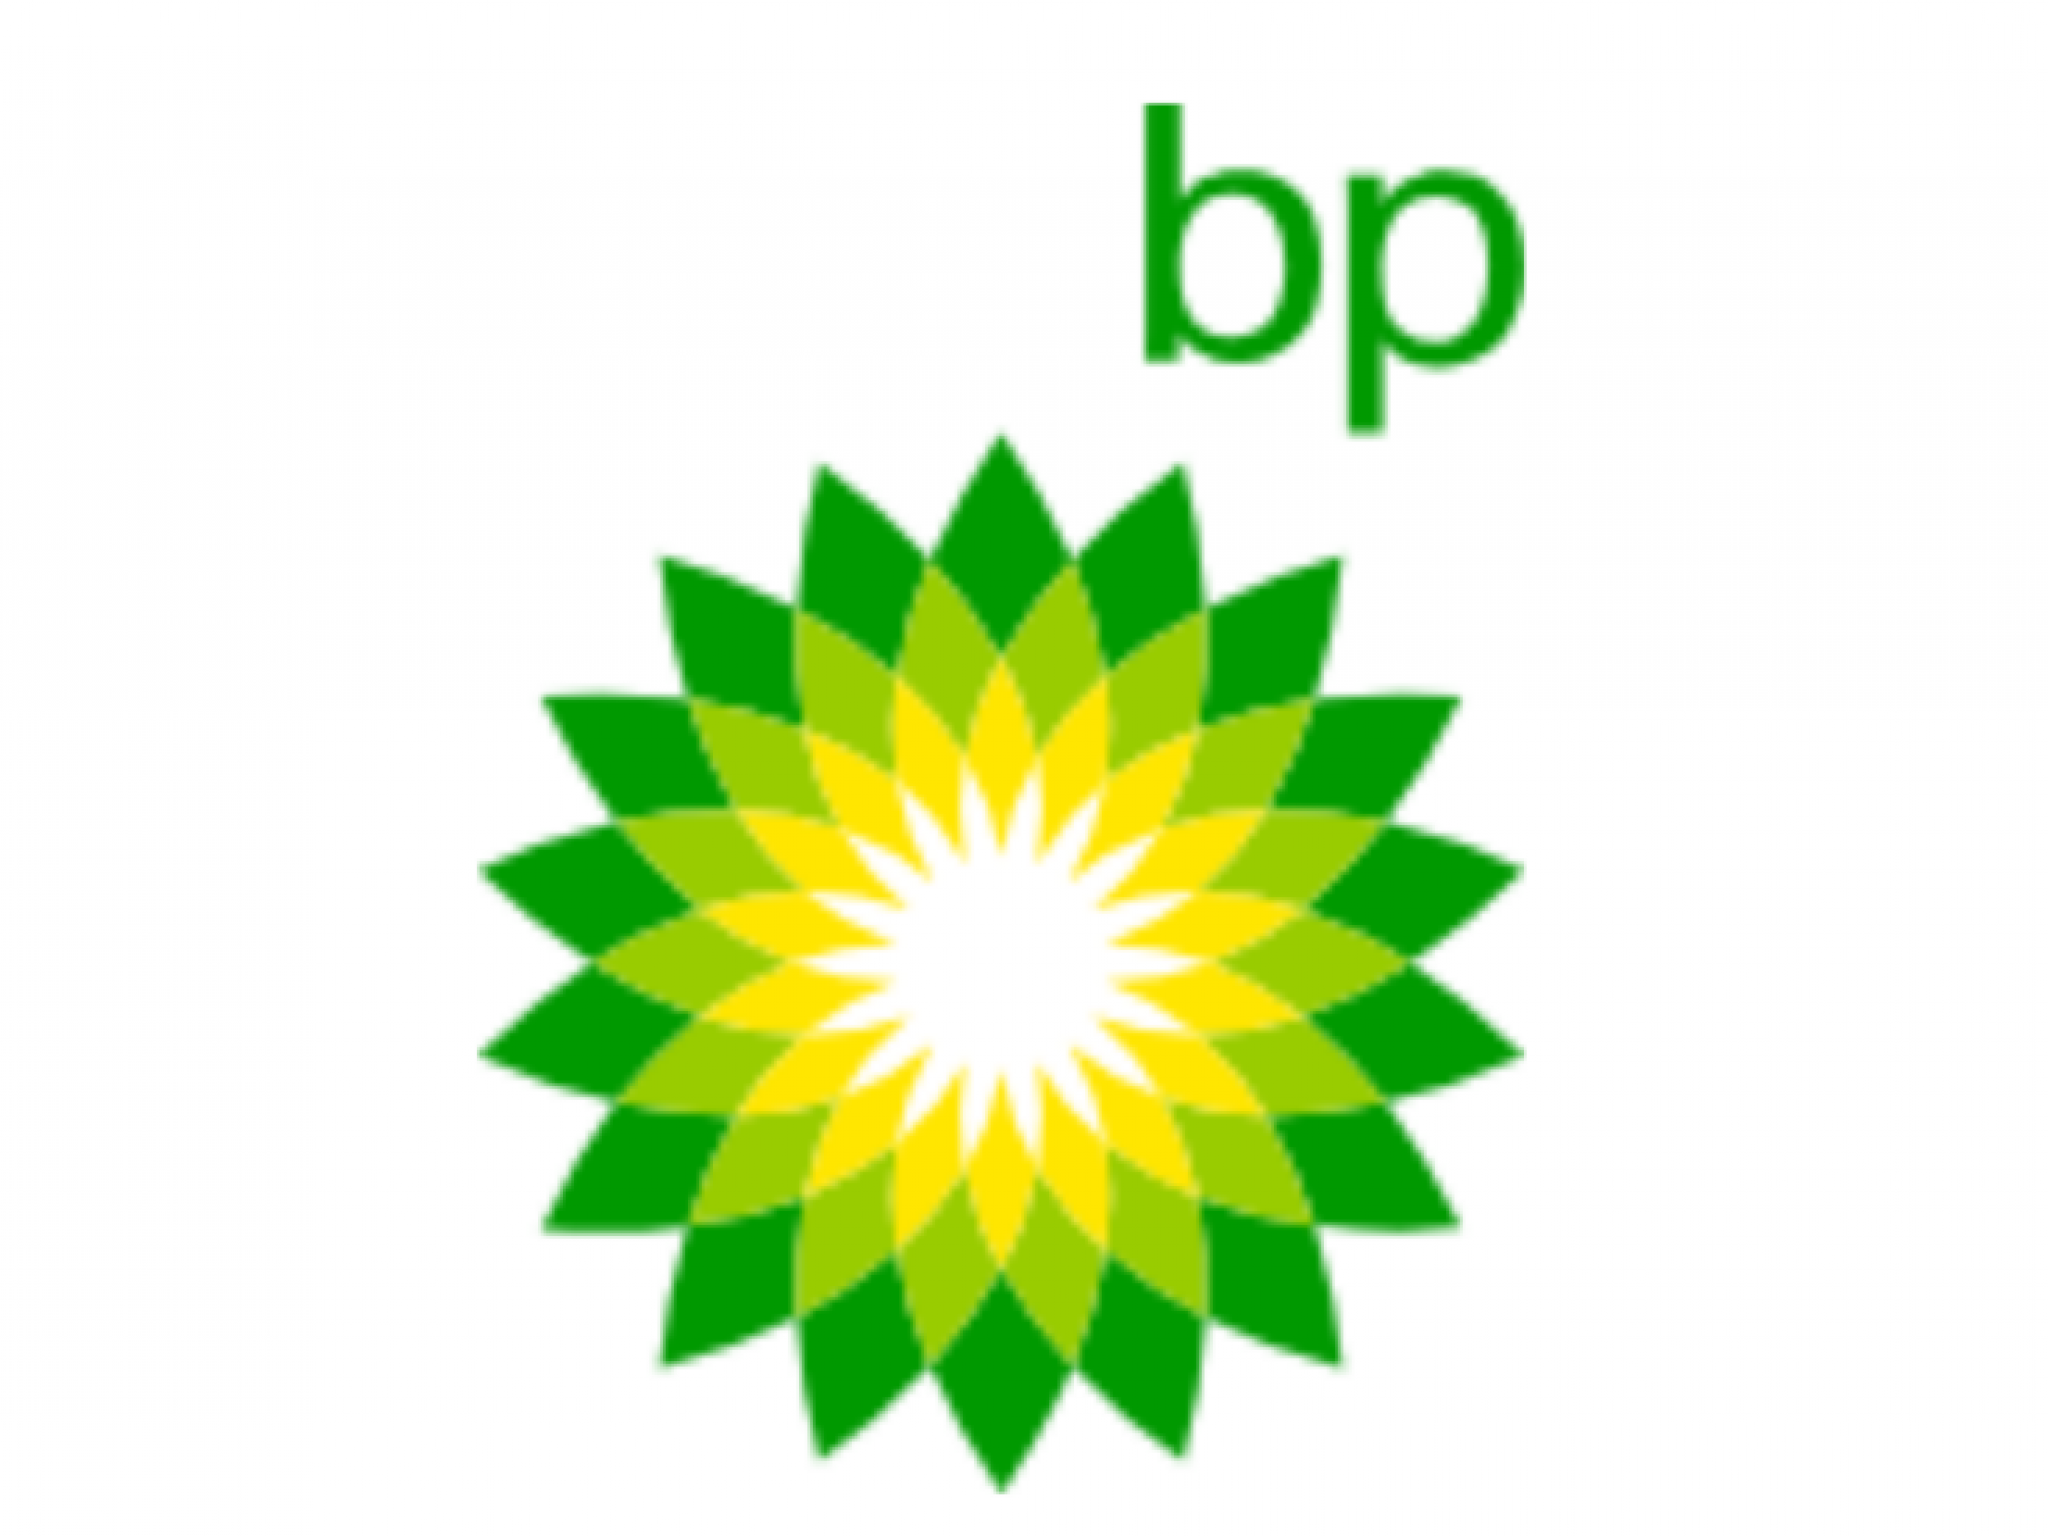  whats-going-on-with-bp-shares-premarket-today 